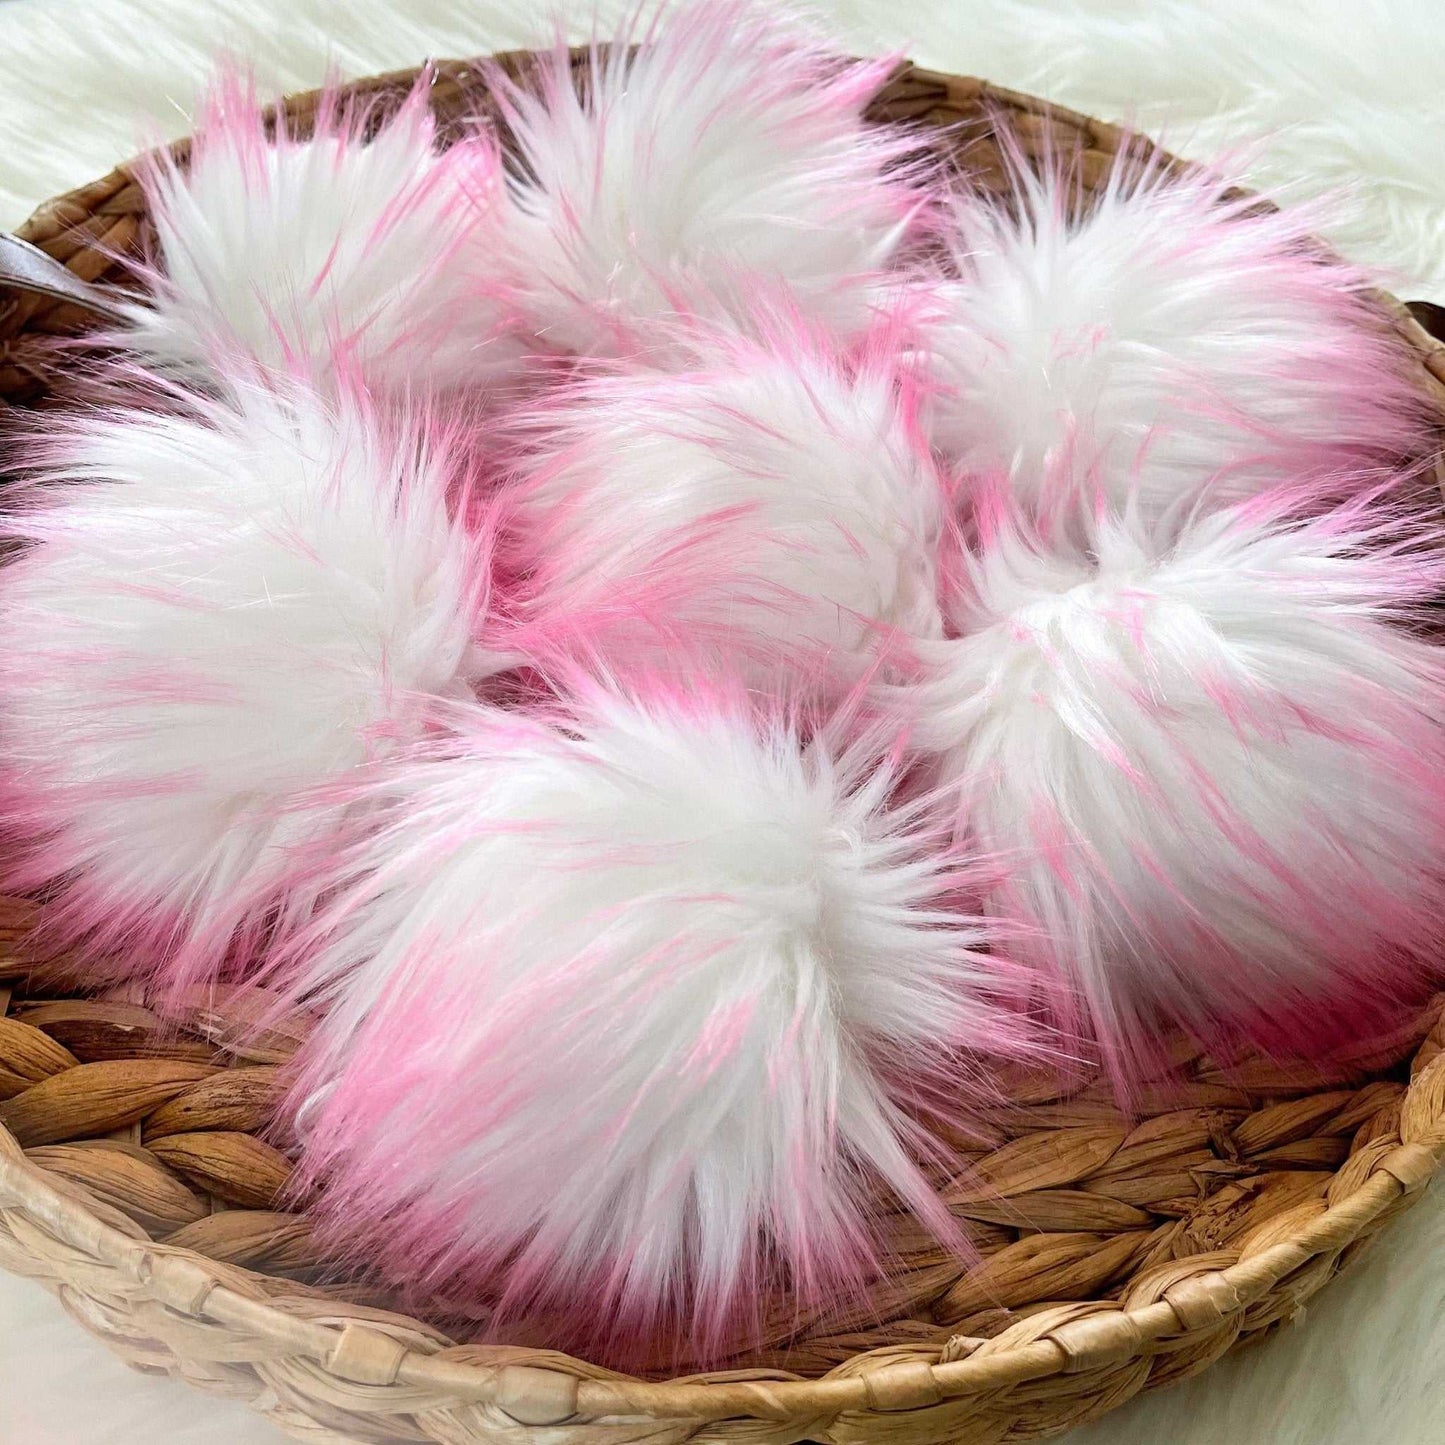 Bubblegum Faux Fur Fabric by the Yard or Meter | Pink, Pompom Fur, Arts & Crafts, Decor, Costume Faux Fur Fabric 3 $ Buttons & Beans Co.